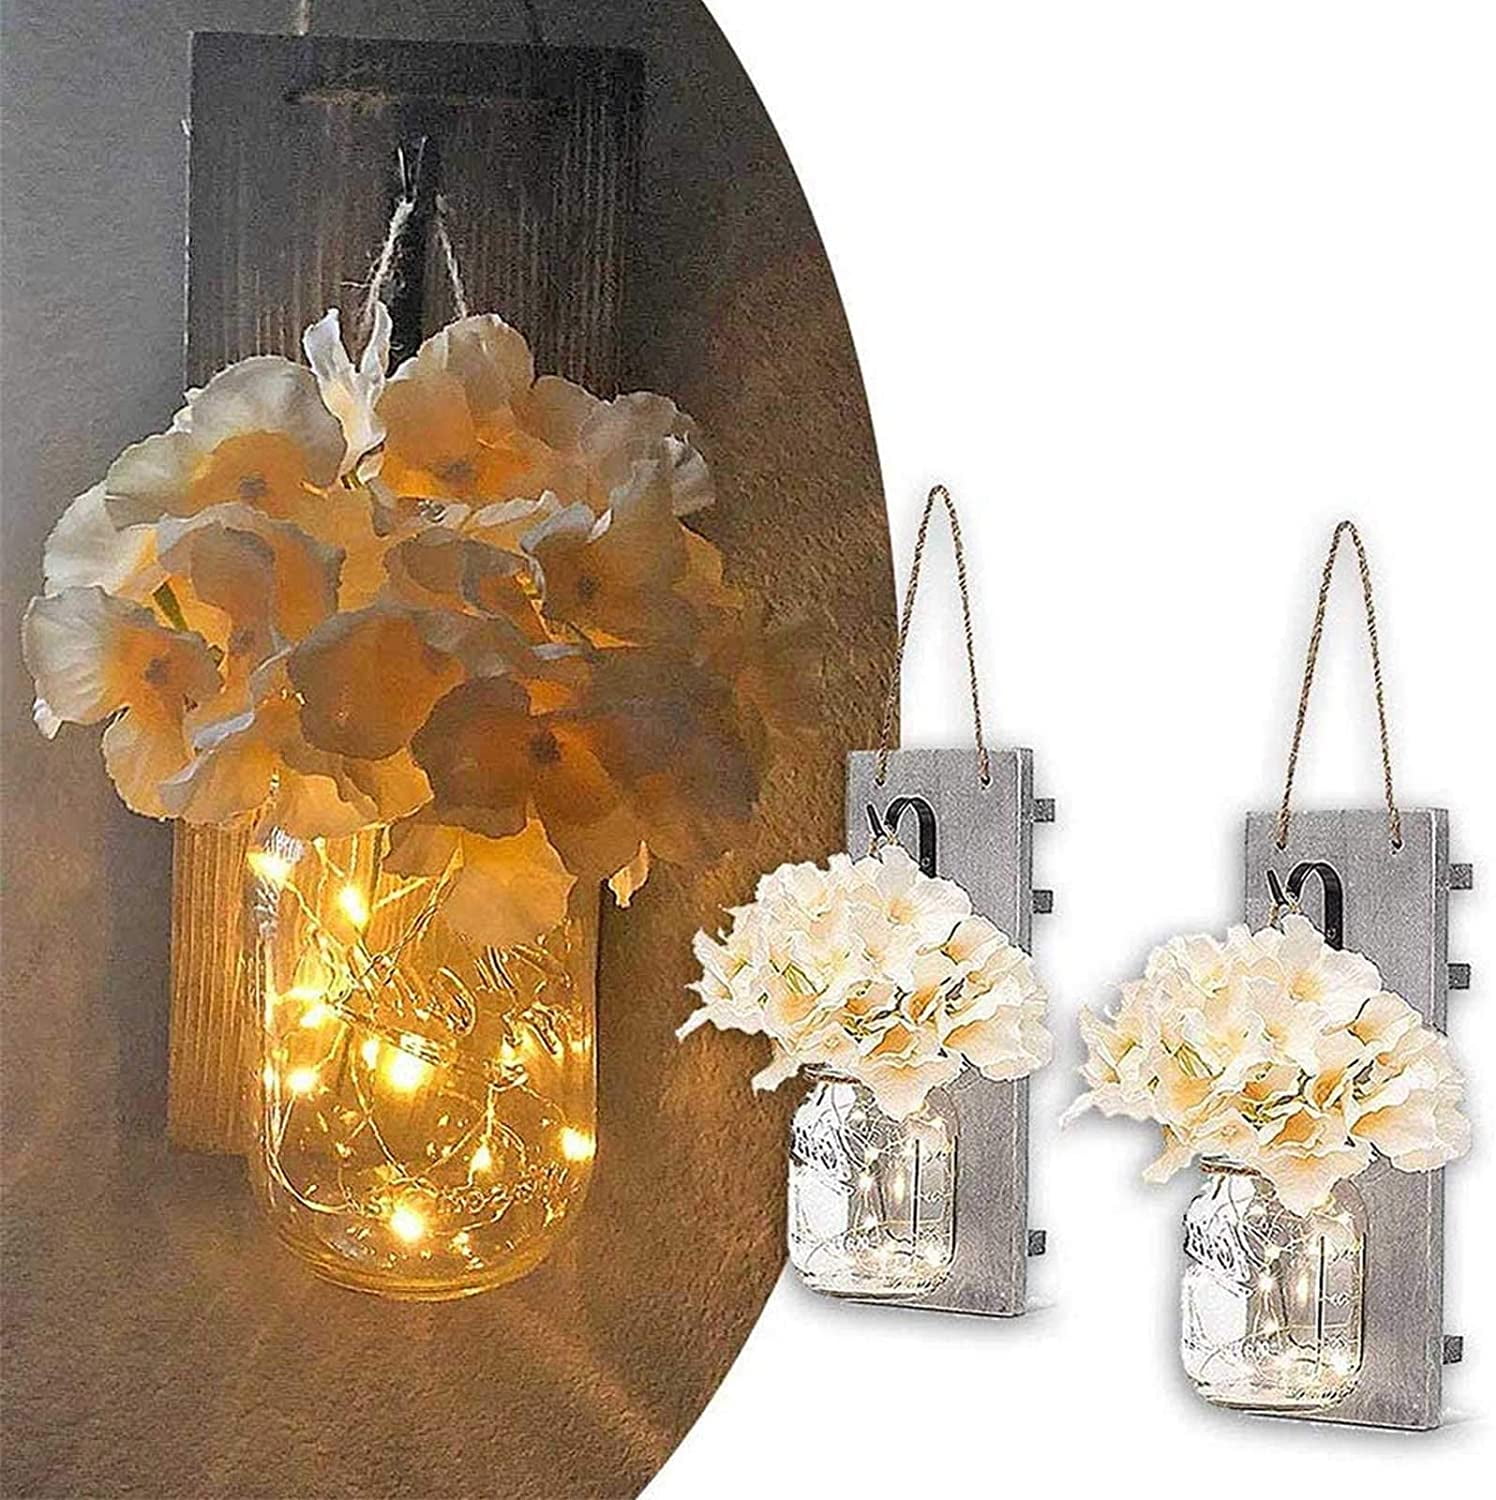 Details about   2 Pack Lighted Mason Jar Wall Sconce Fairy Lights 30LED Rustic Country Art Decor 